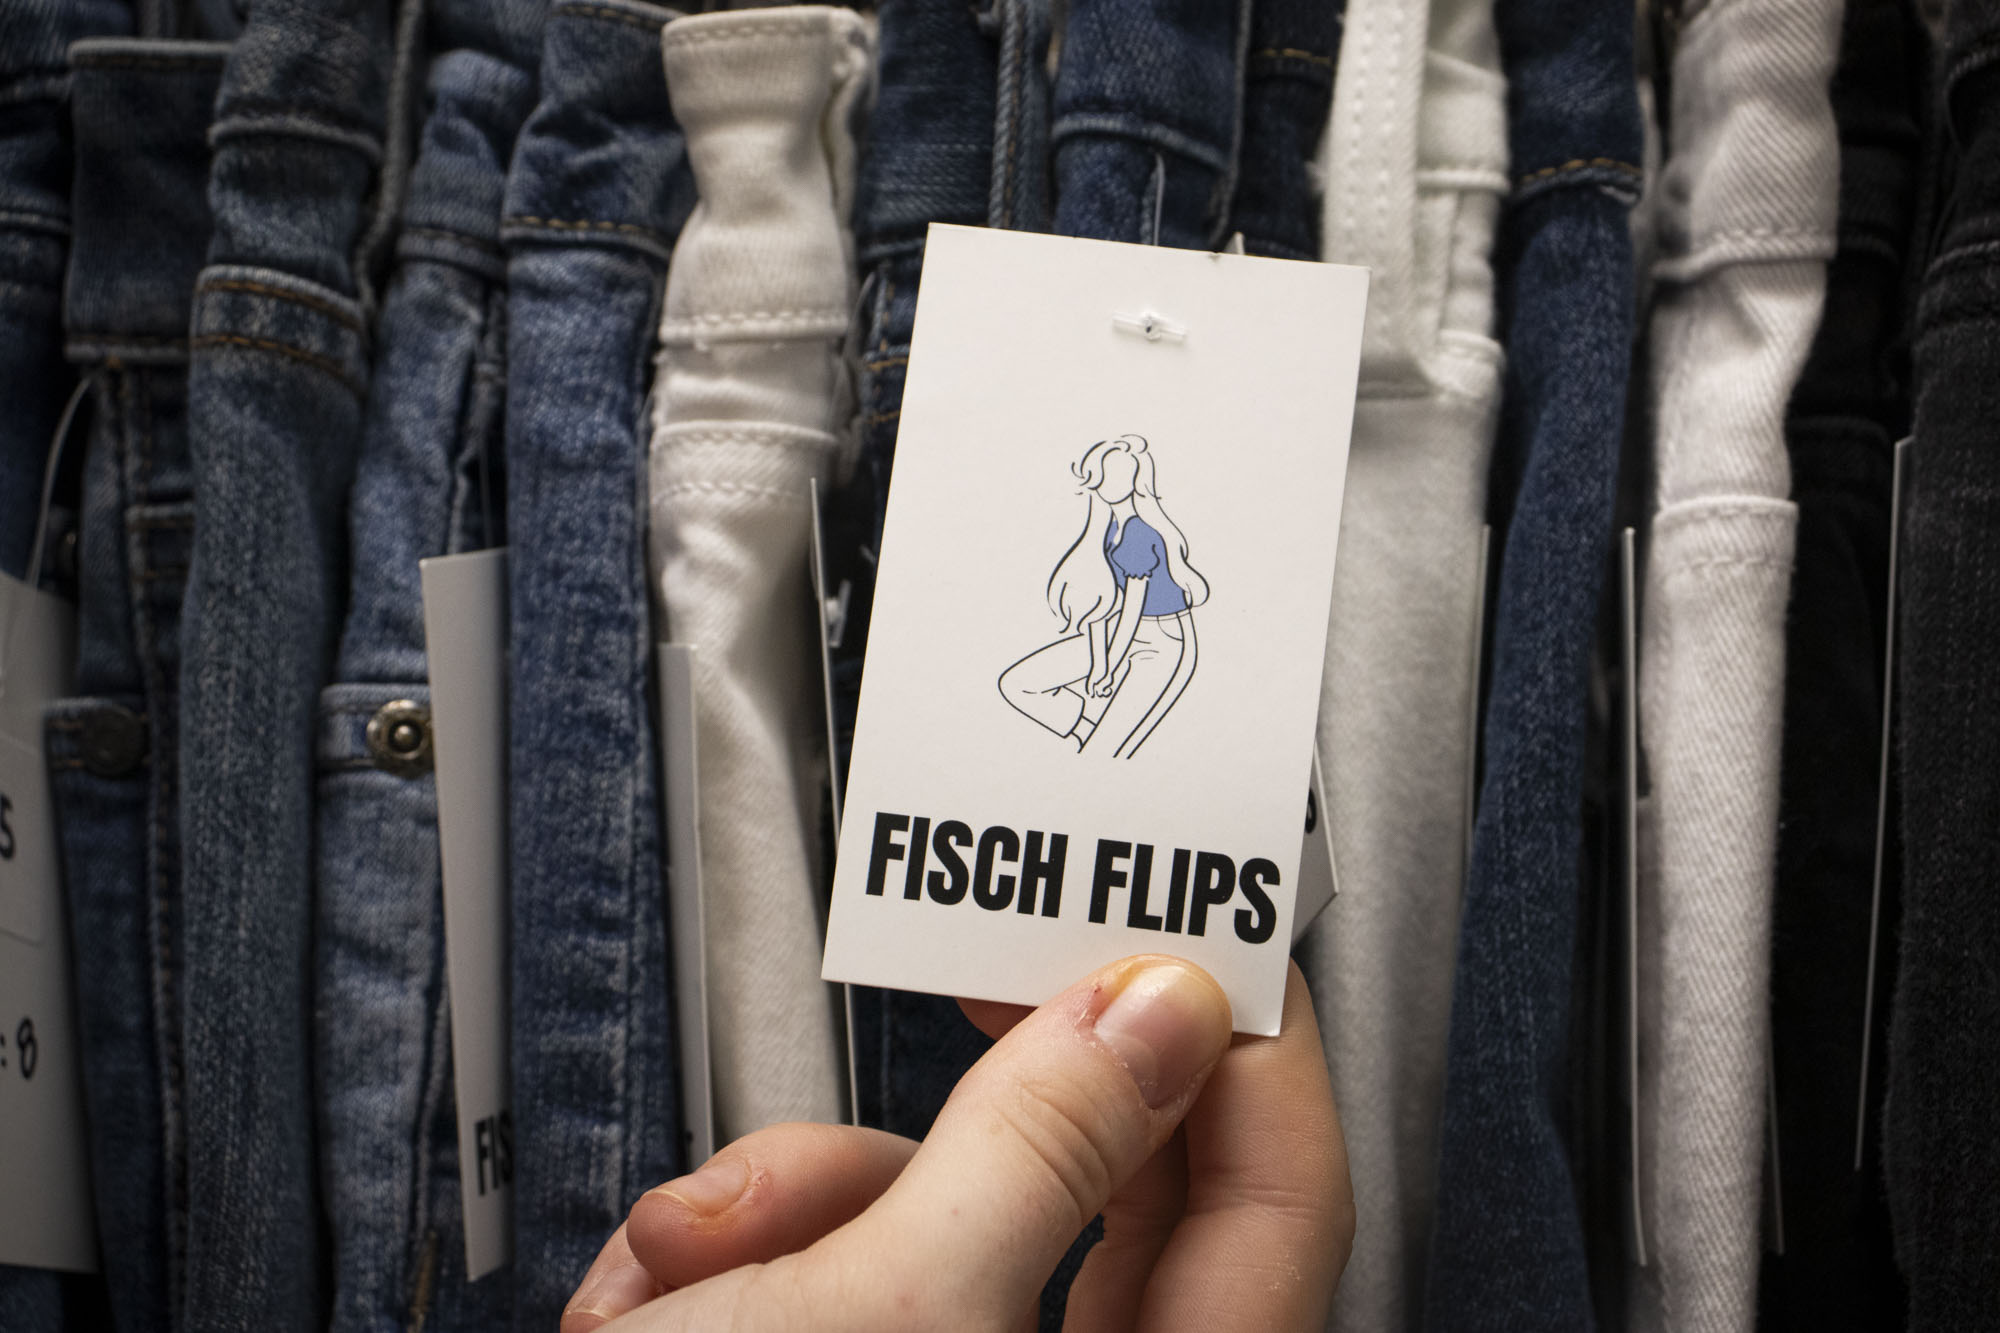 A tag produced for Fisch Flips.